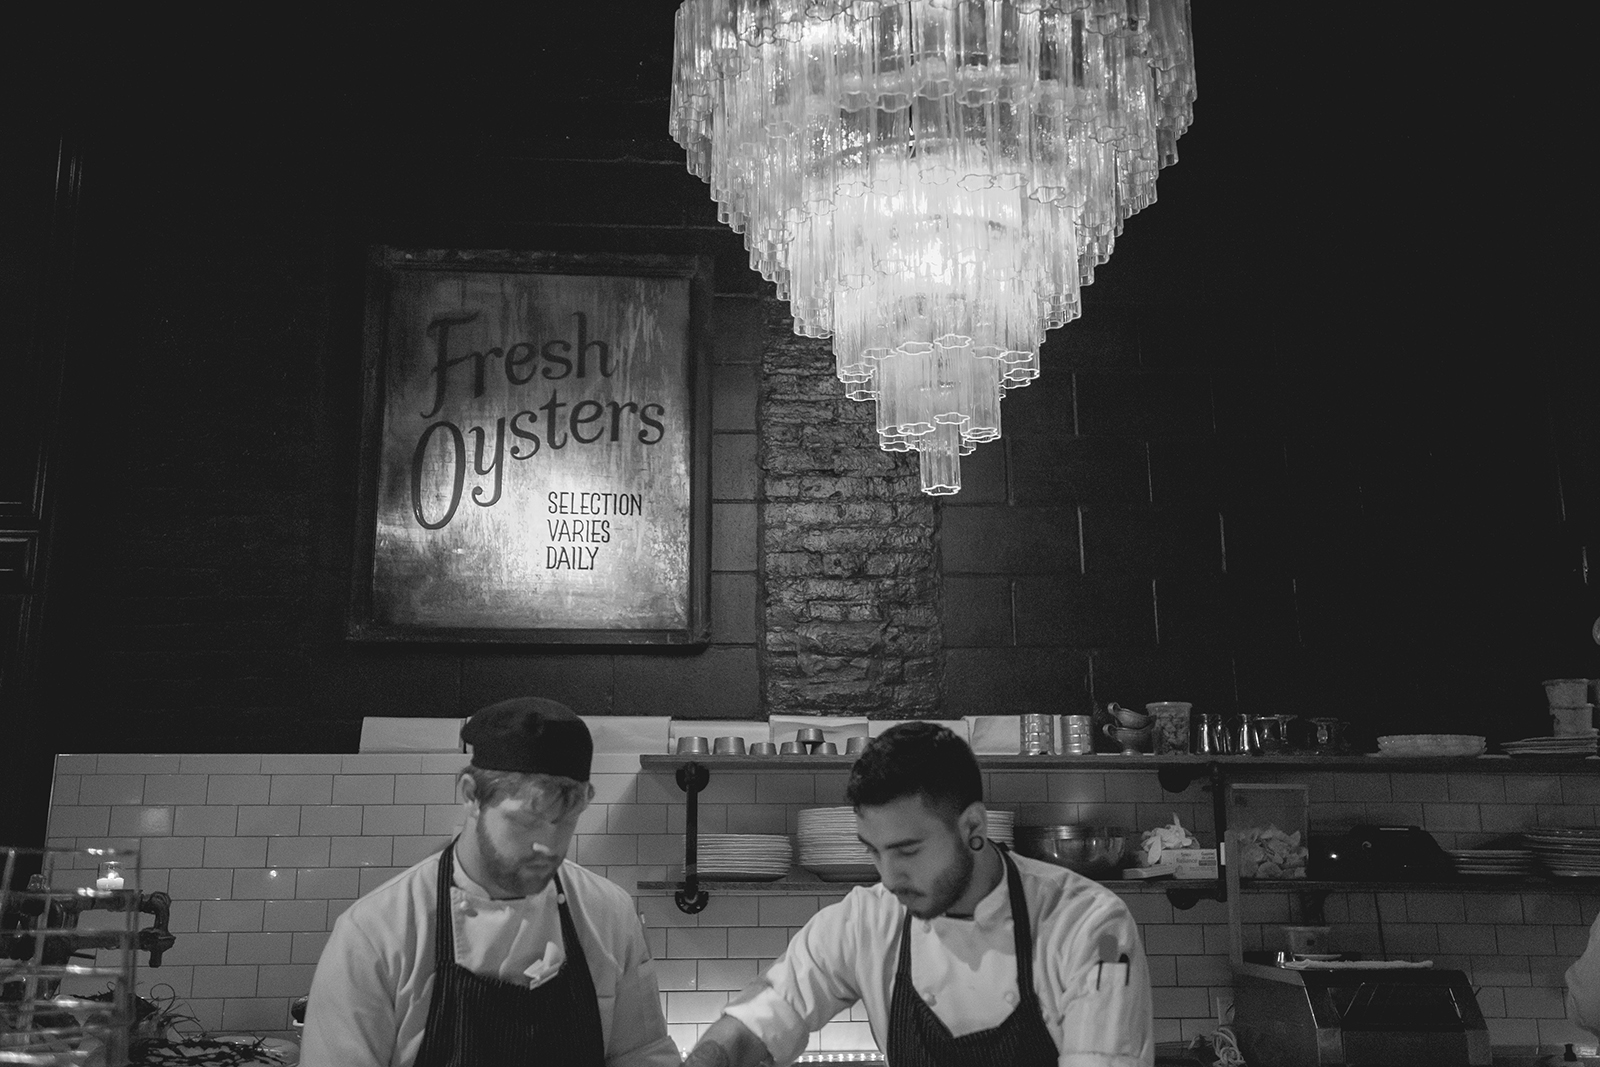 Oyster chefs